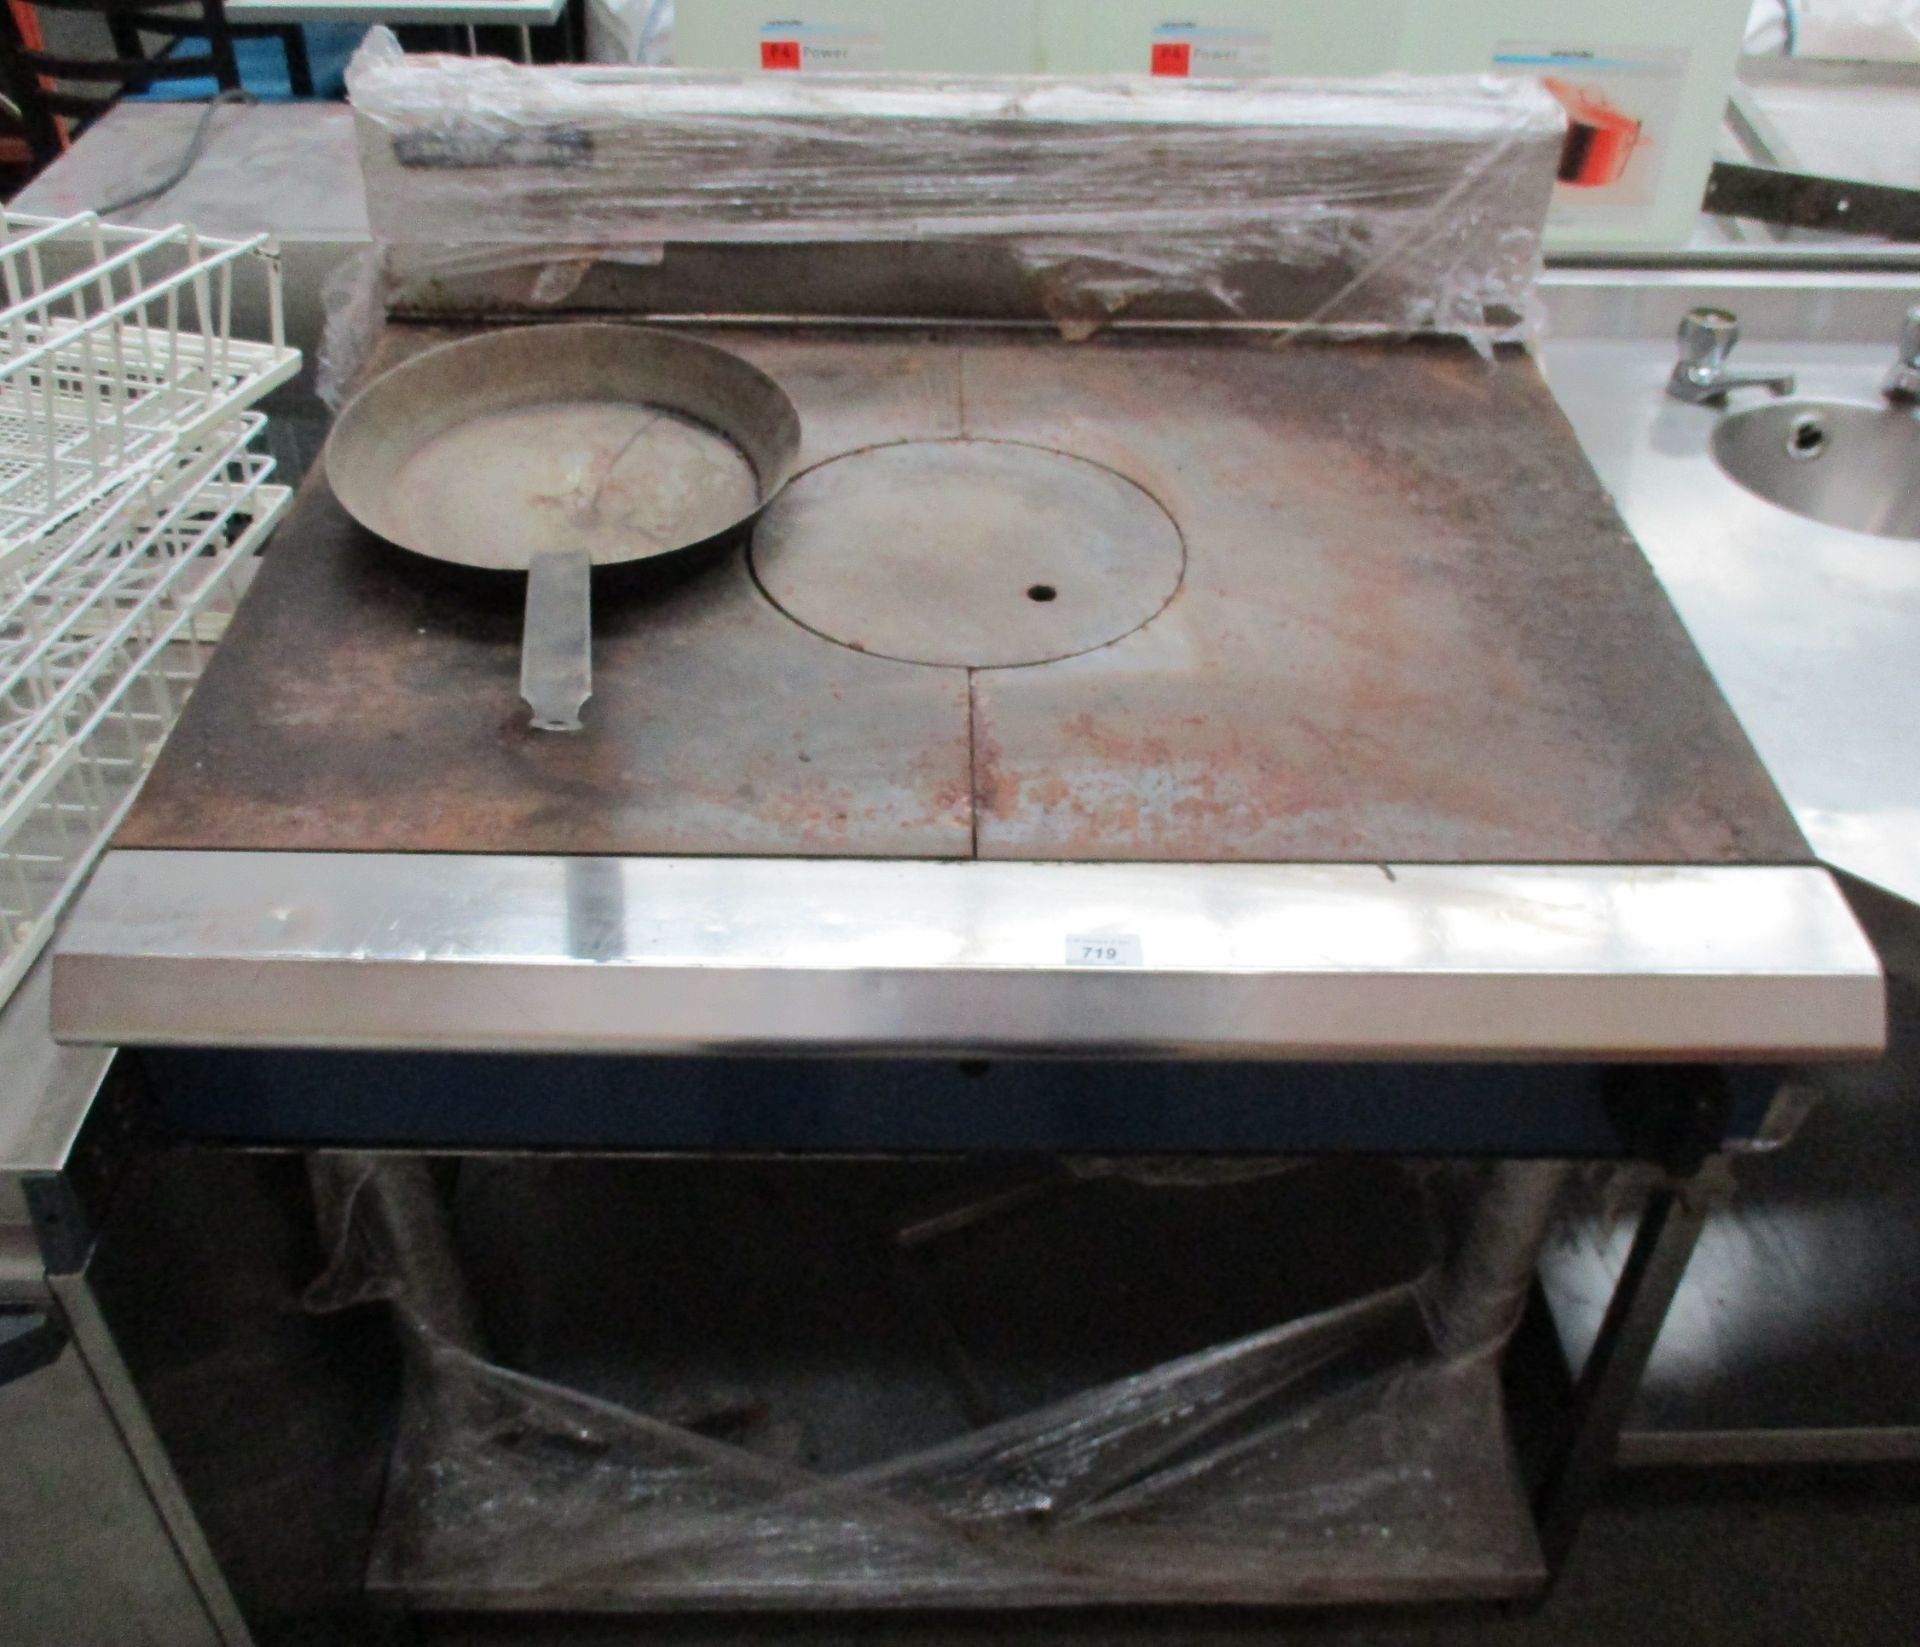 A stainless steel griddle - gas fired complete with frying pan